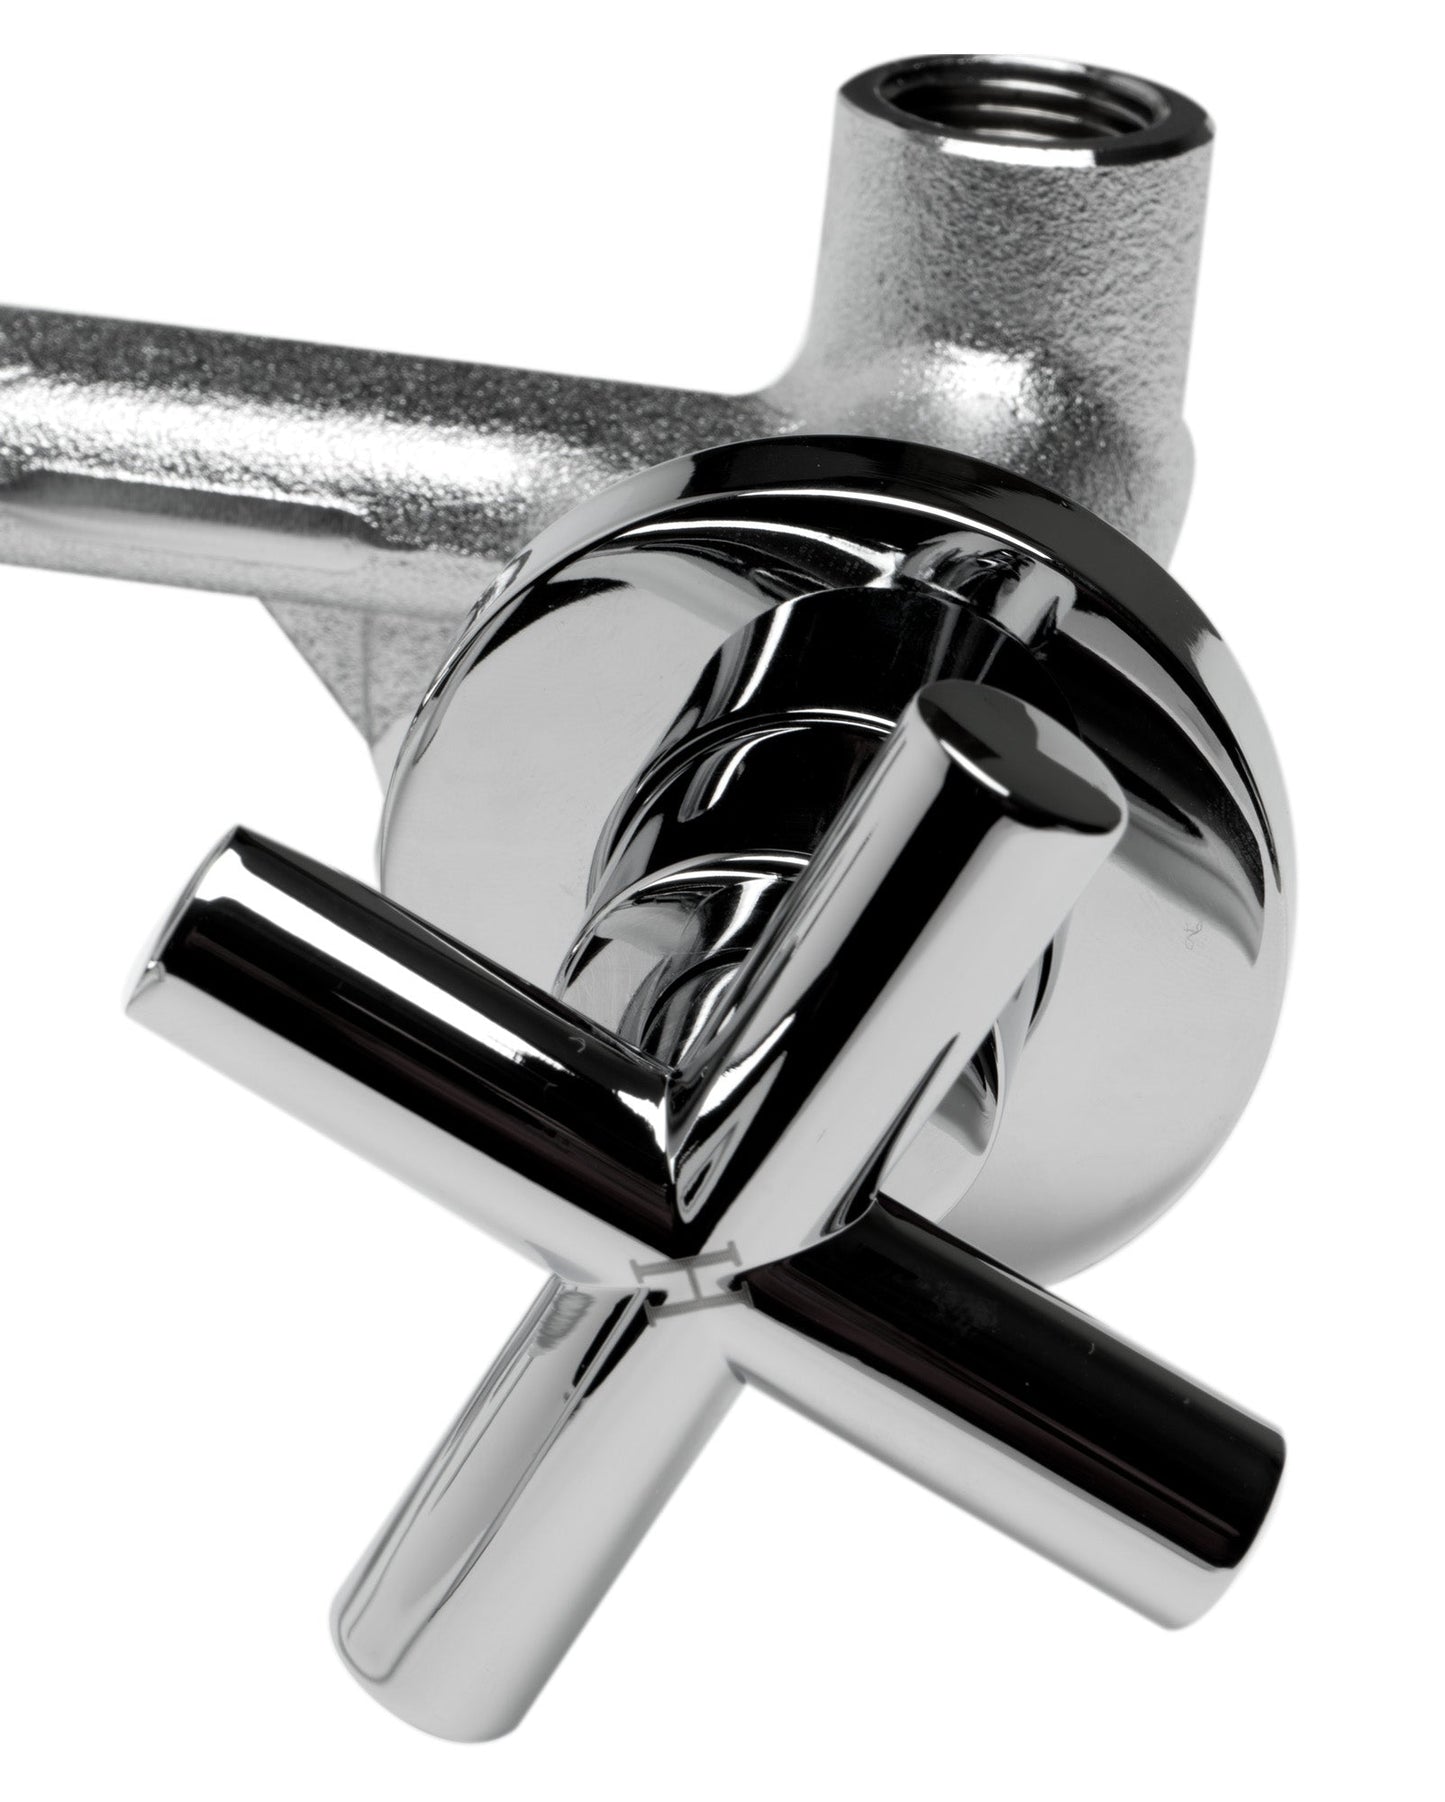 8 Inch Widespread Wall-Mounted Cross Handle Faucet